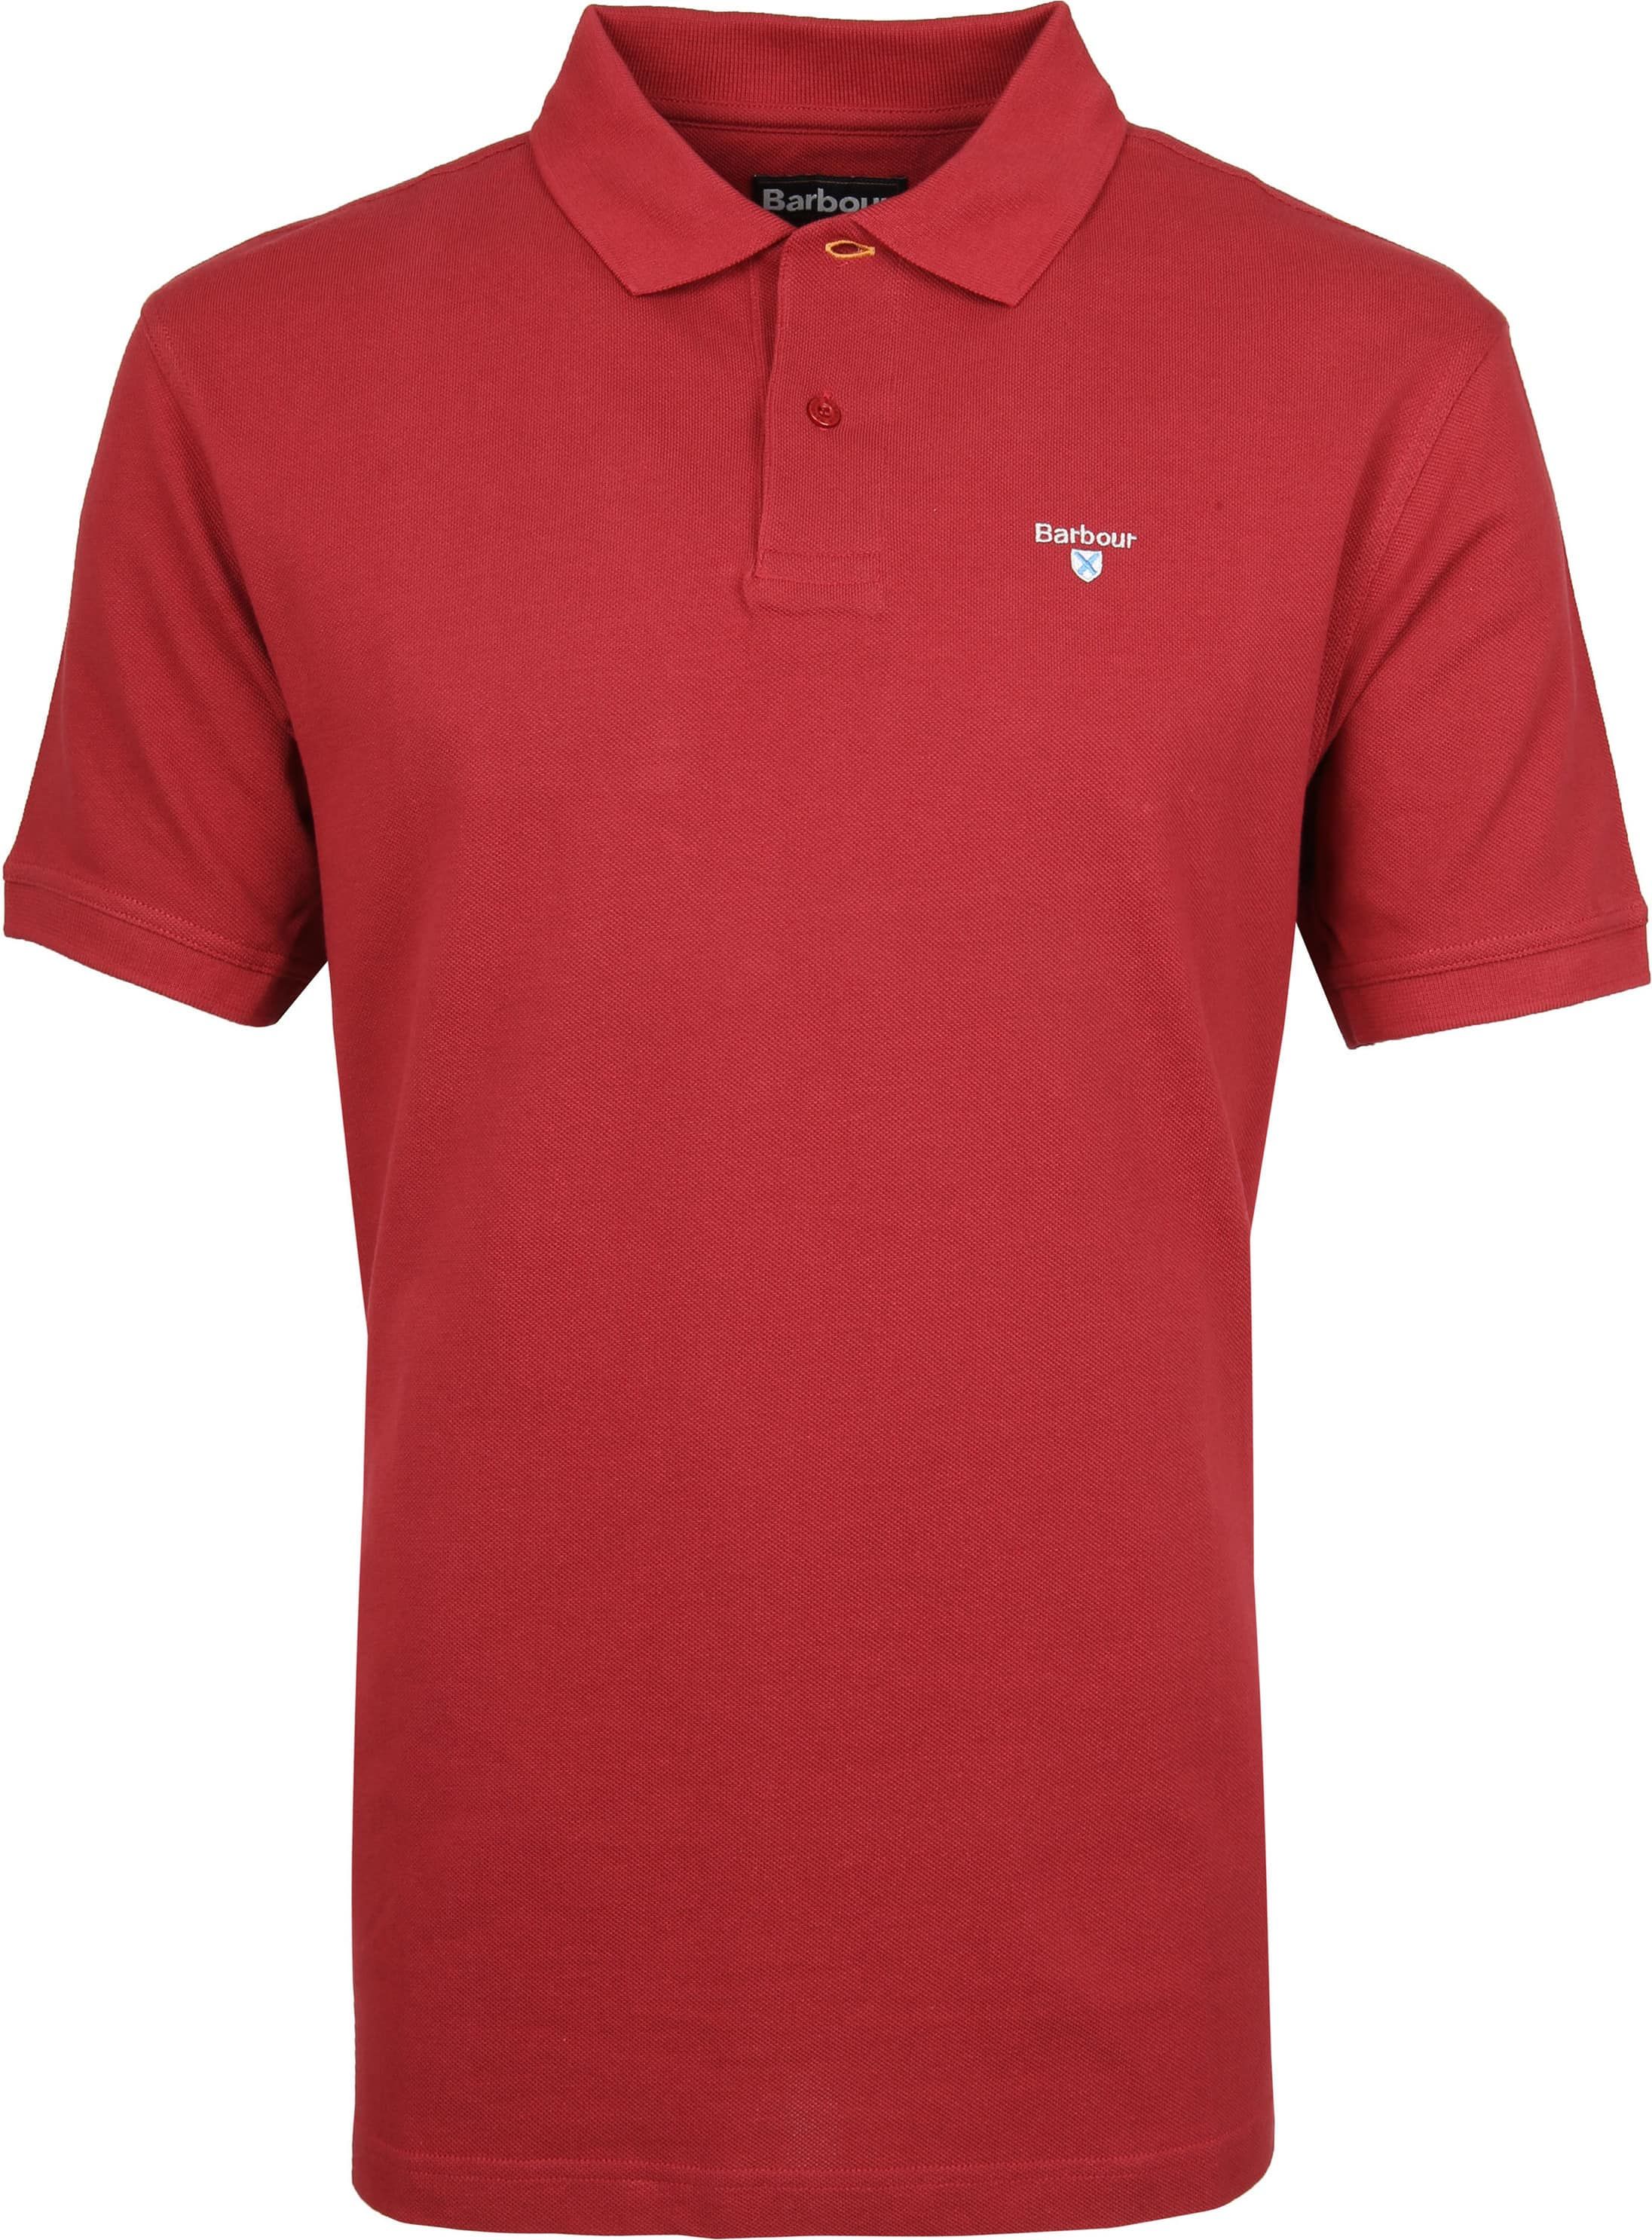 Barbour Basic Polo Shirt Red size L